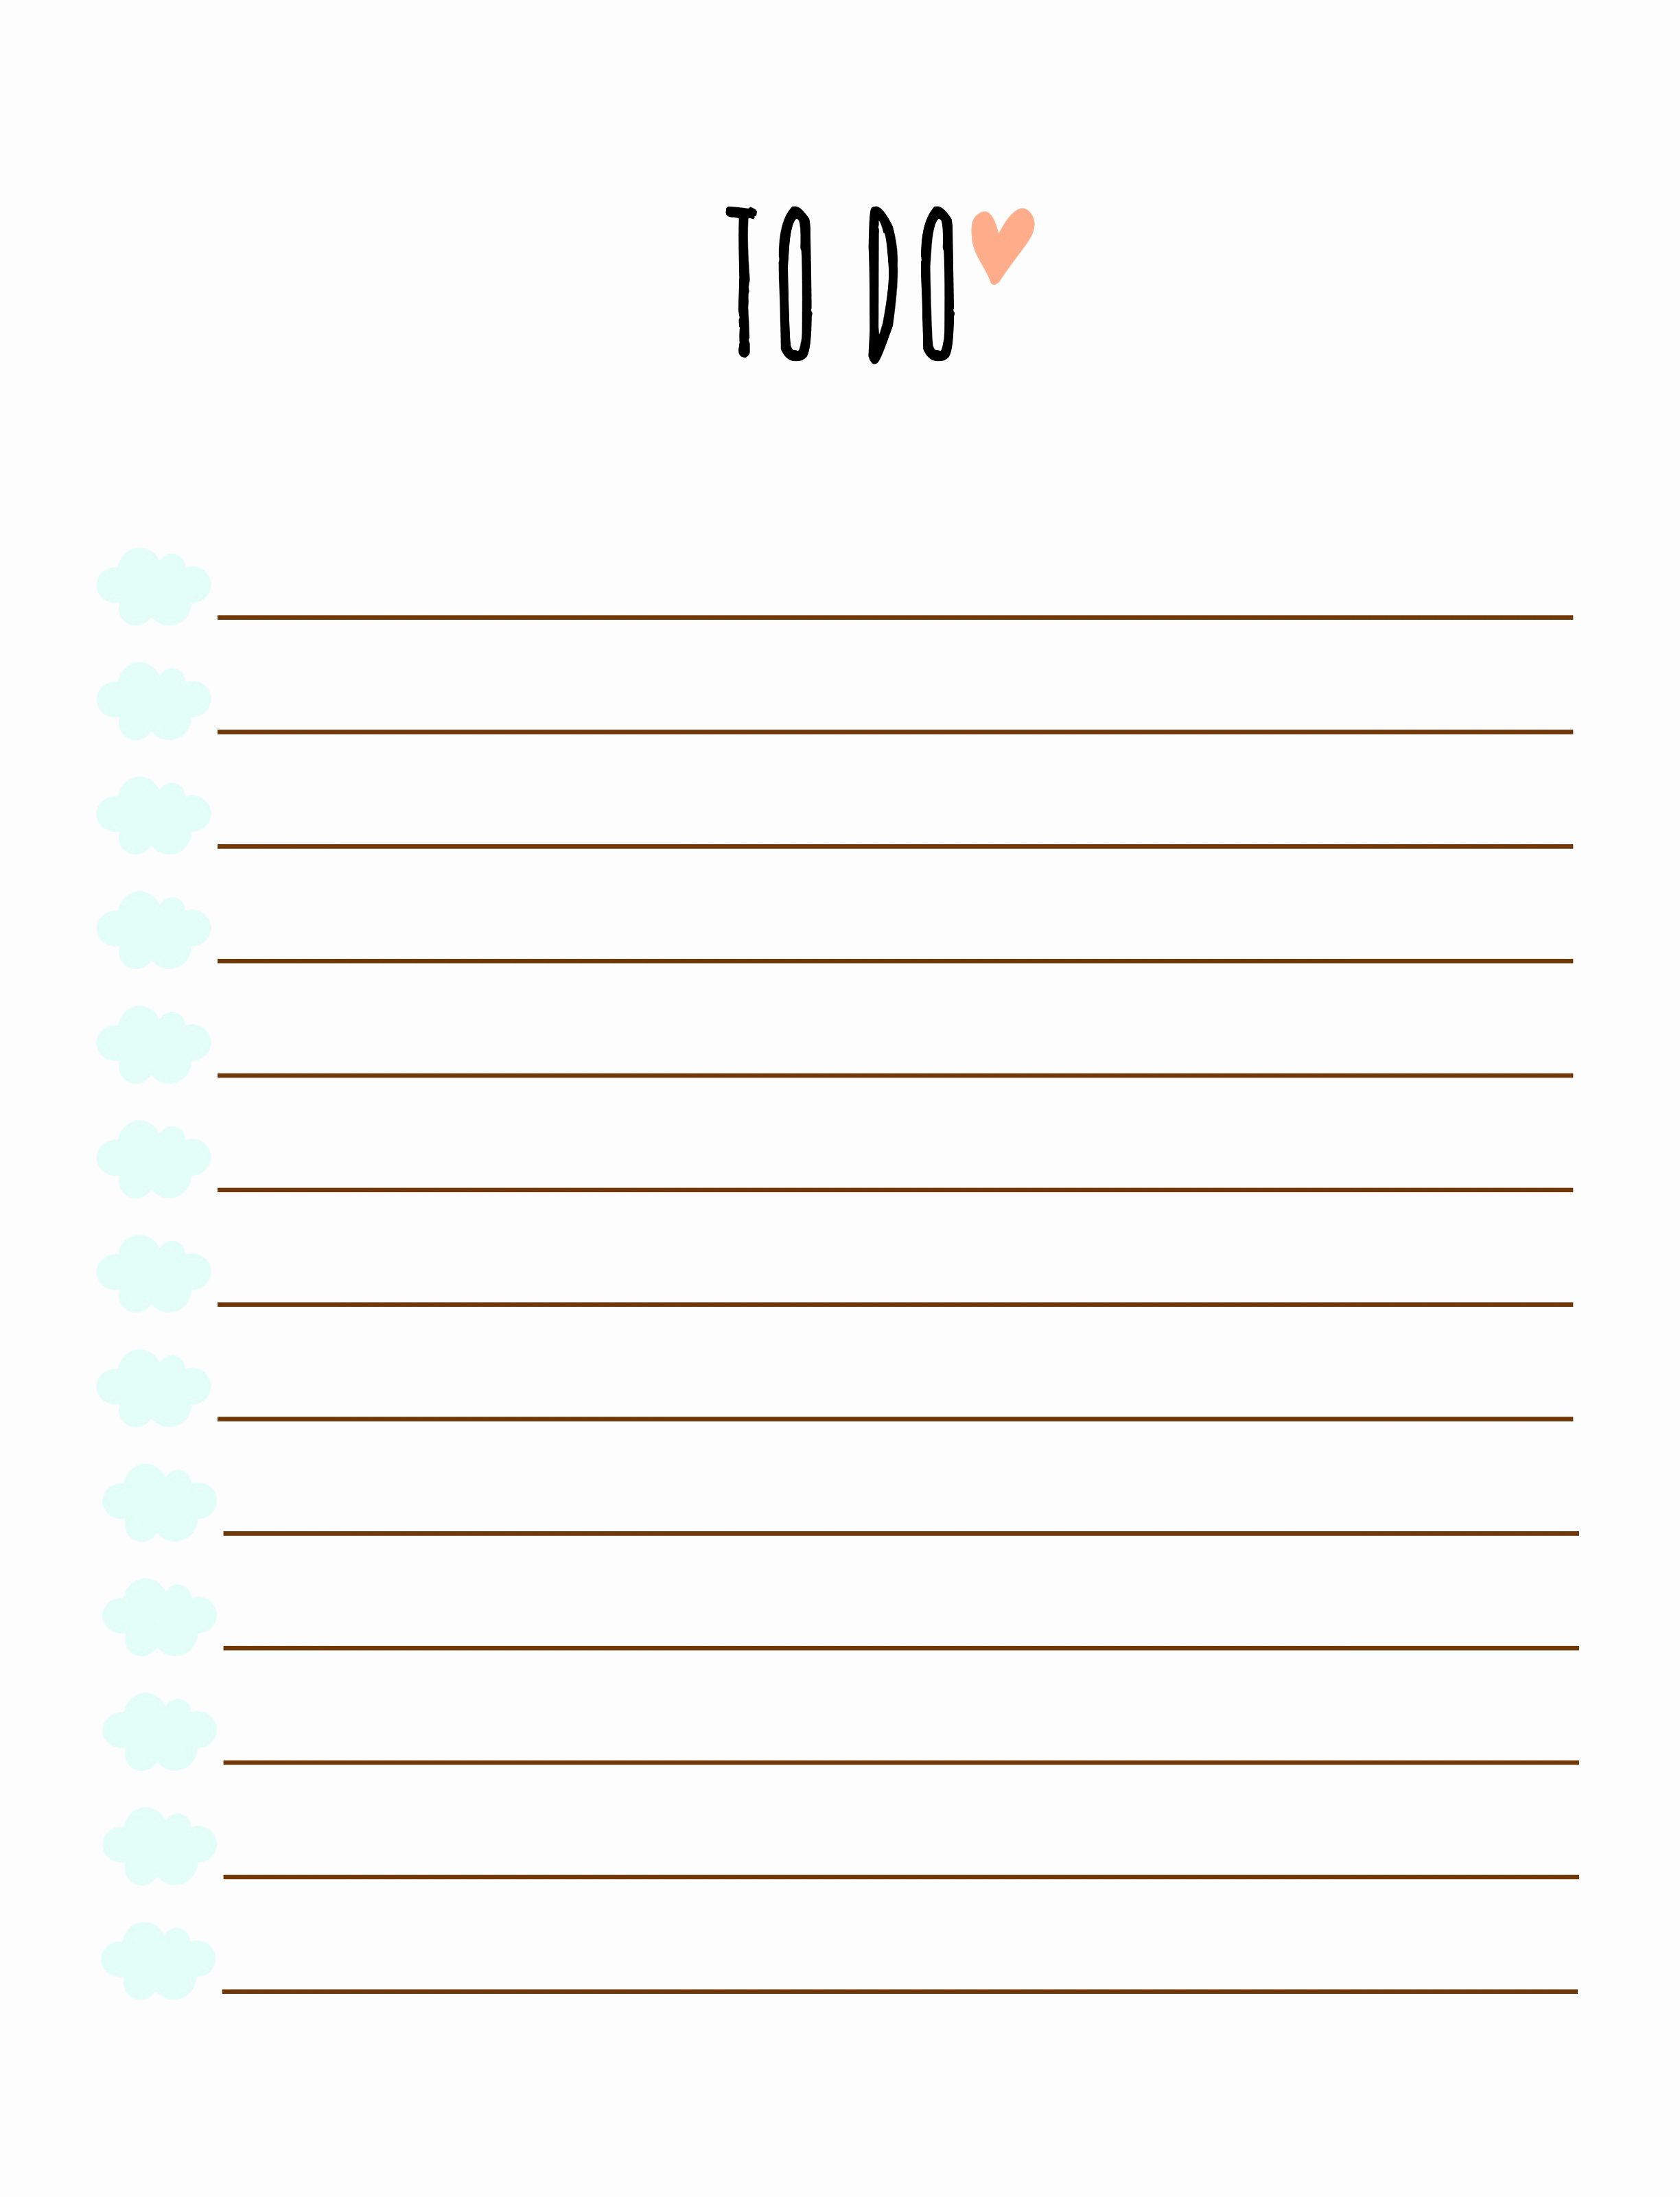 To Do List Word Template Fresh 7 Daily to Do List Template for Word Tioru